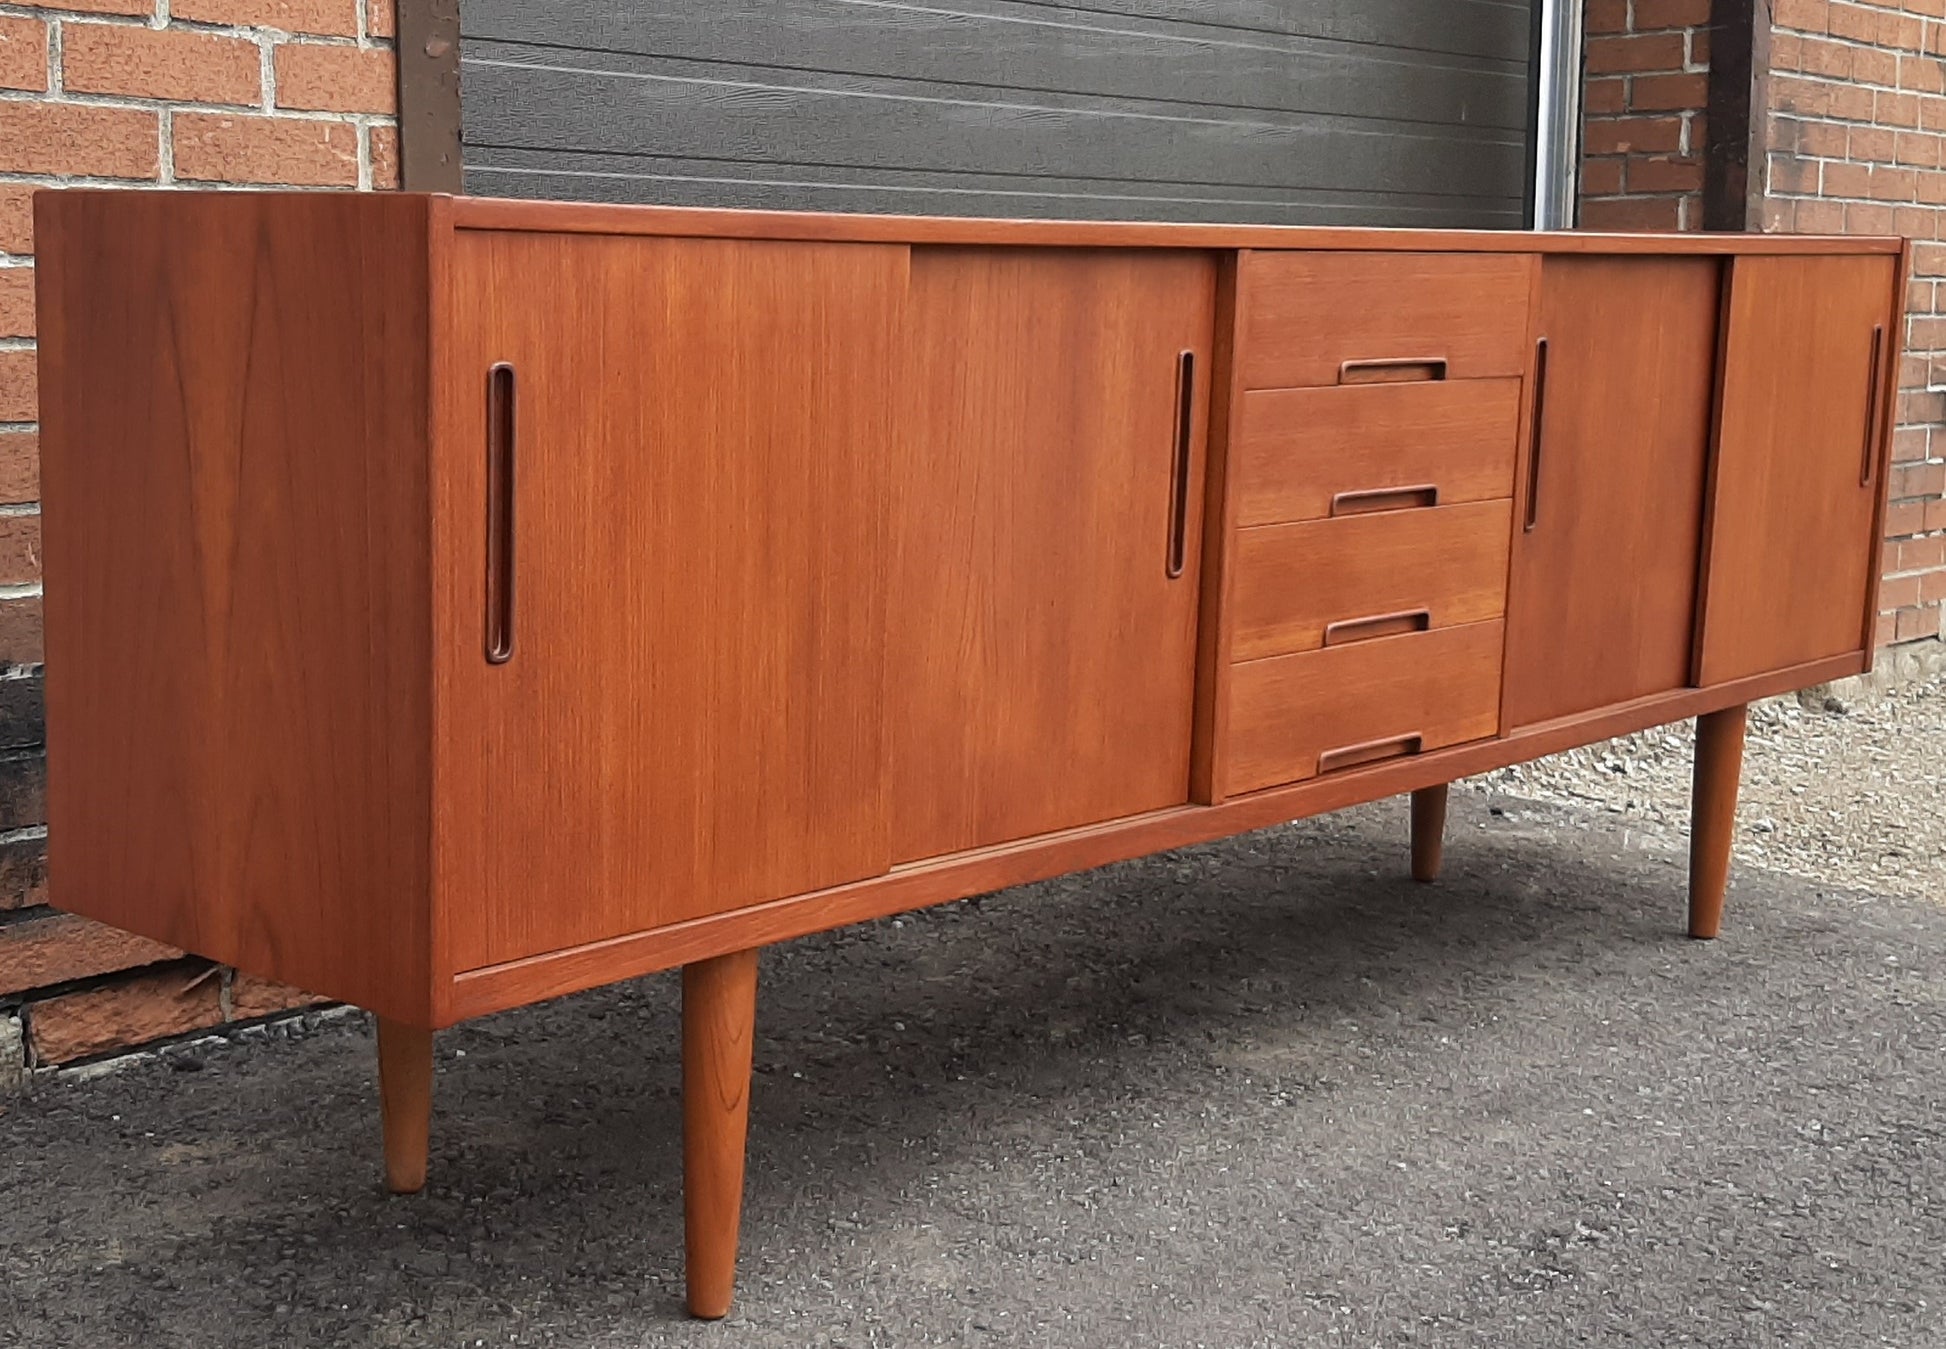 REFINISHED MCM Teak Credenza Sideboard GIGANT by Nils Jonnson for TROEDS 87" PERFECT - Mid Century Modern Toronto